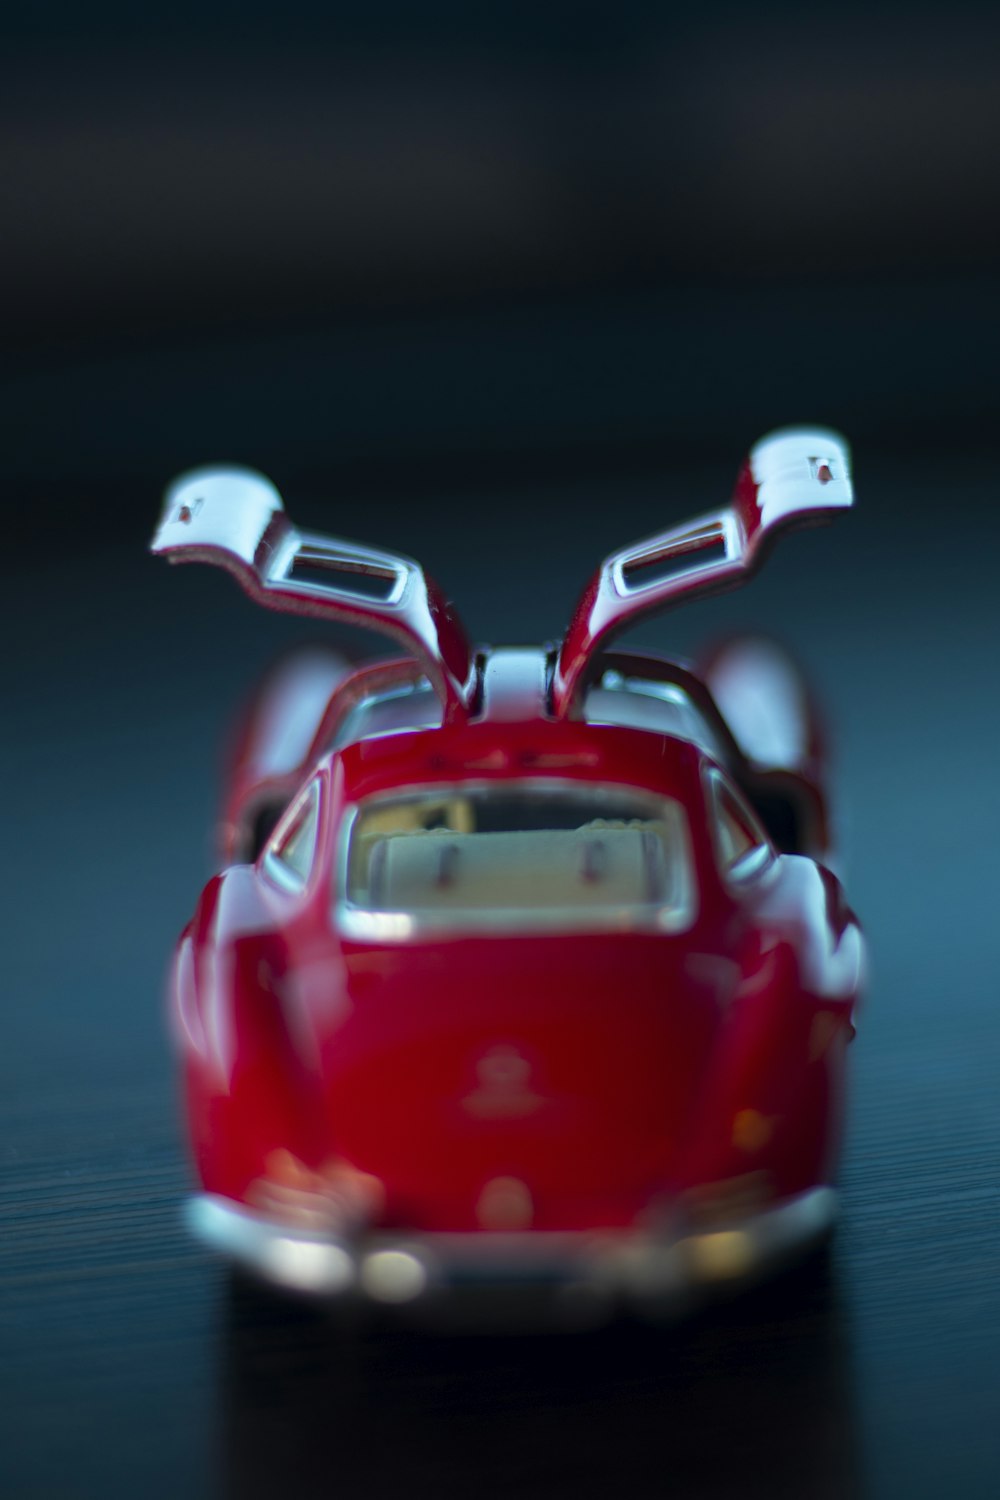 a close up of a toy